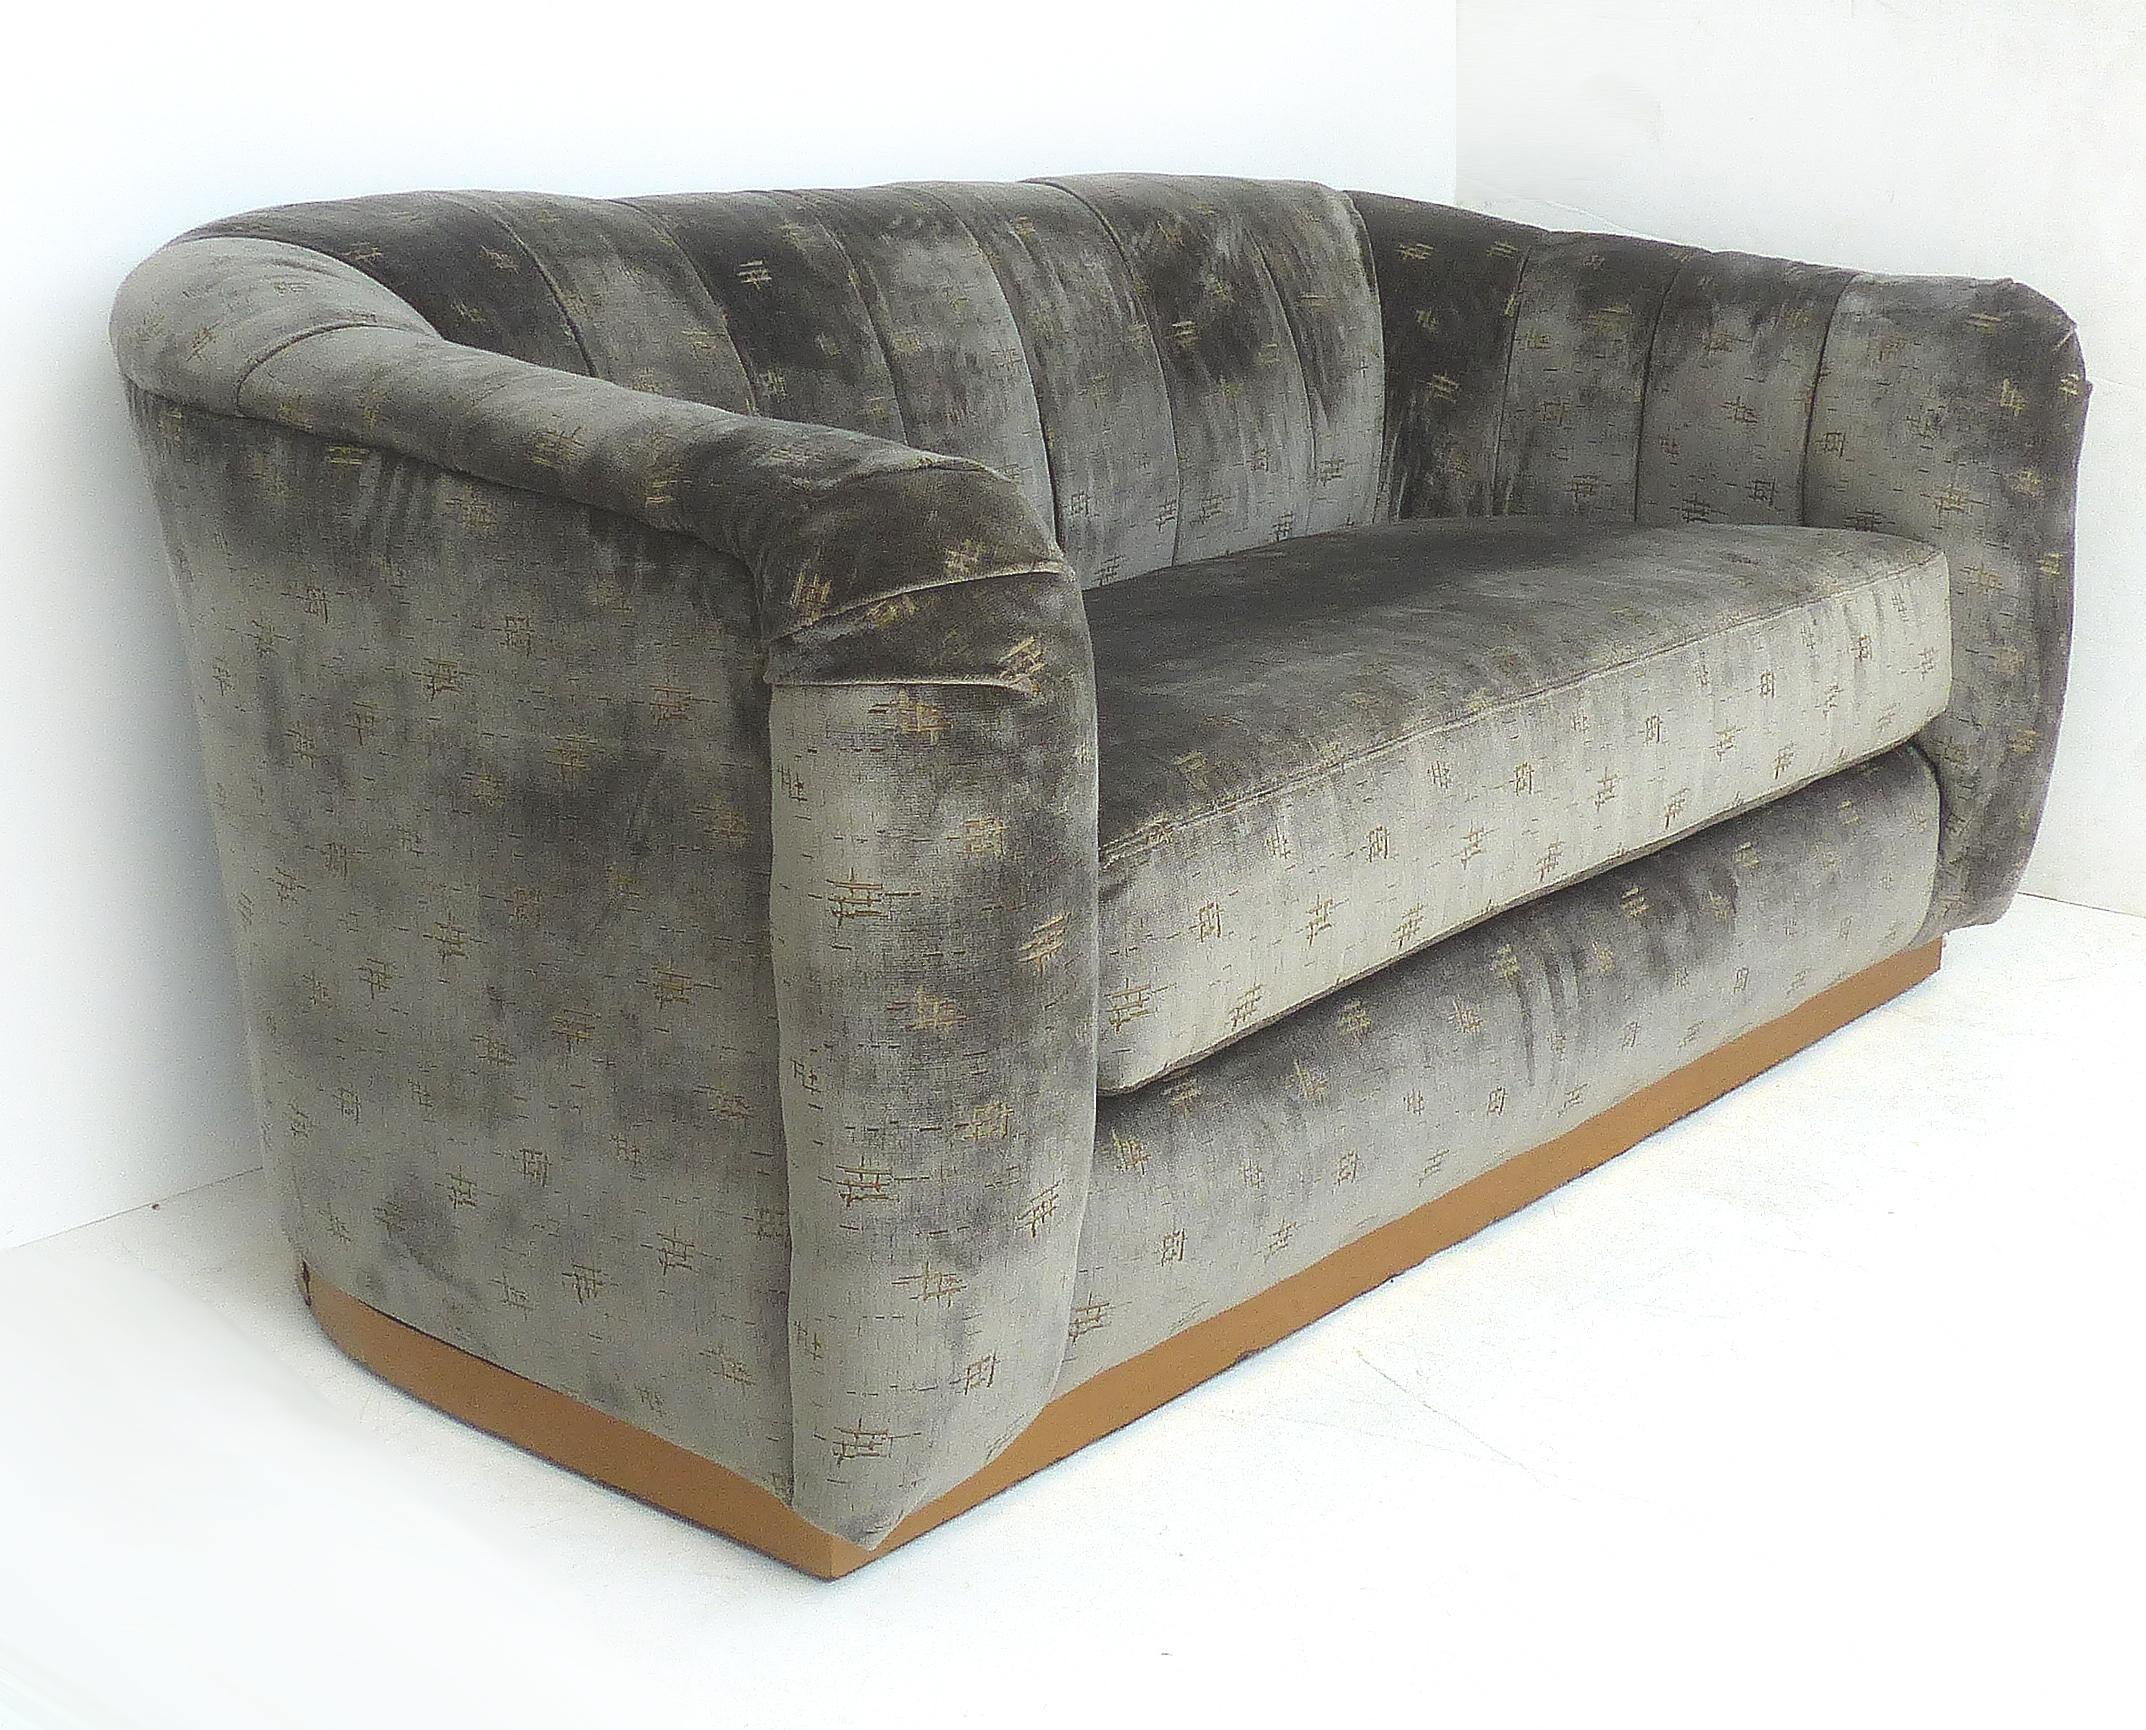 Sofa/Loveseat newly upholstered in Rubelli fabric, brass banded base

Offered for sale is a contemporary sofa that is newly upholstered with Italian Rubelli fabric in the Olimpia Tortora pattern. The sofa has a brass banded base. This would make